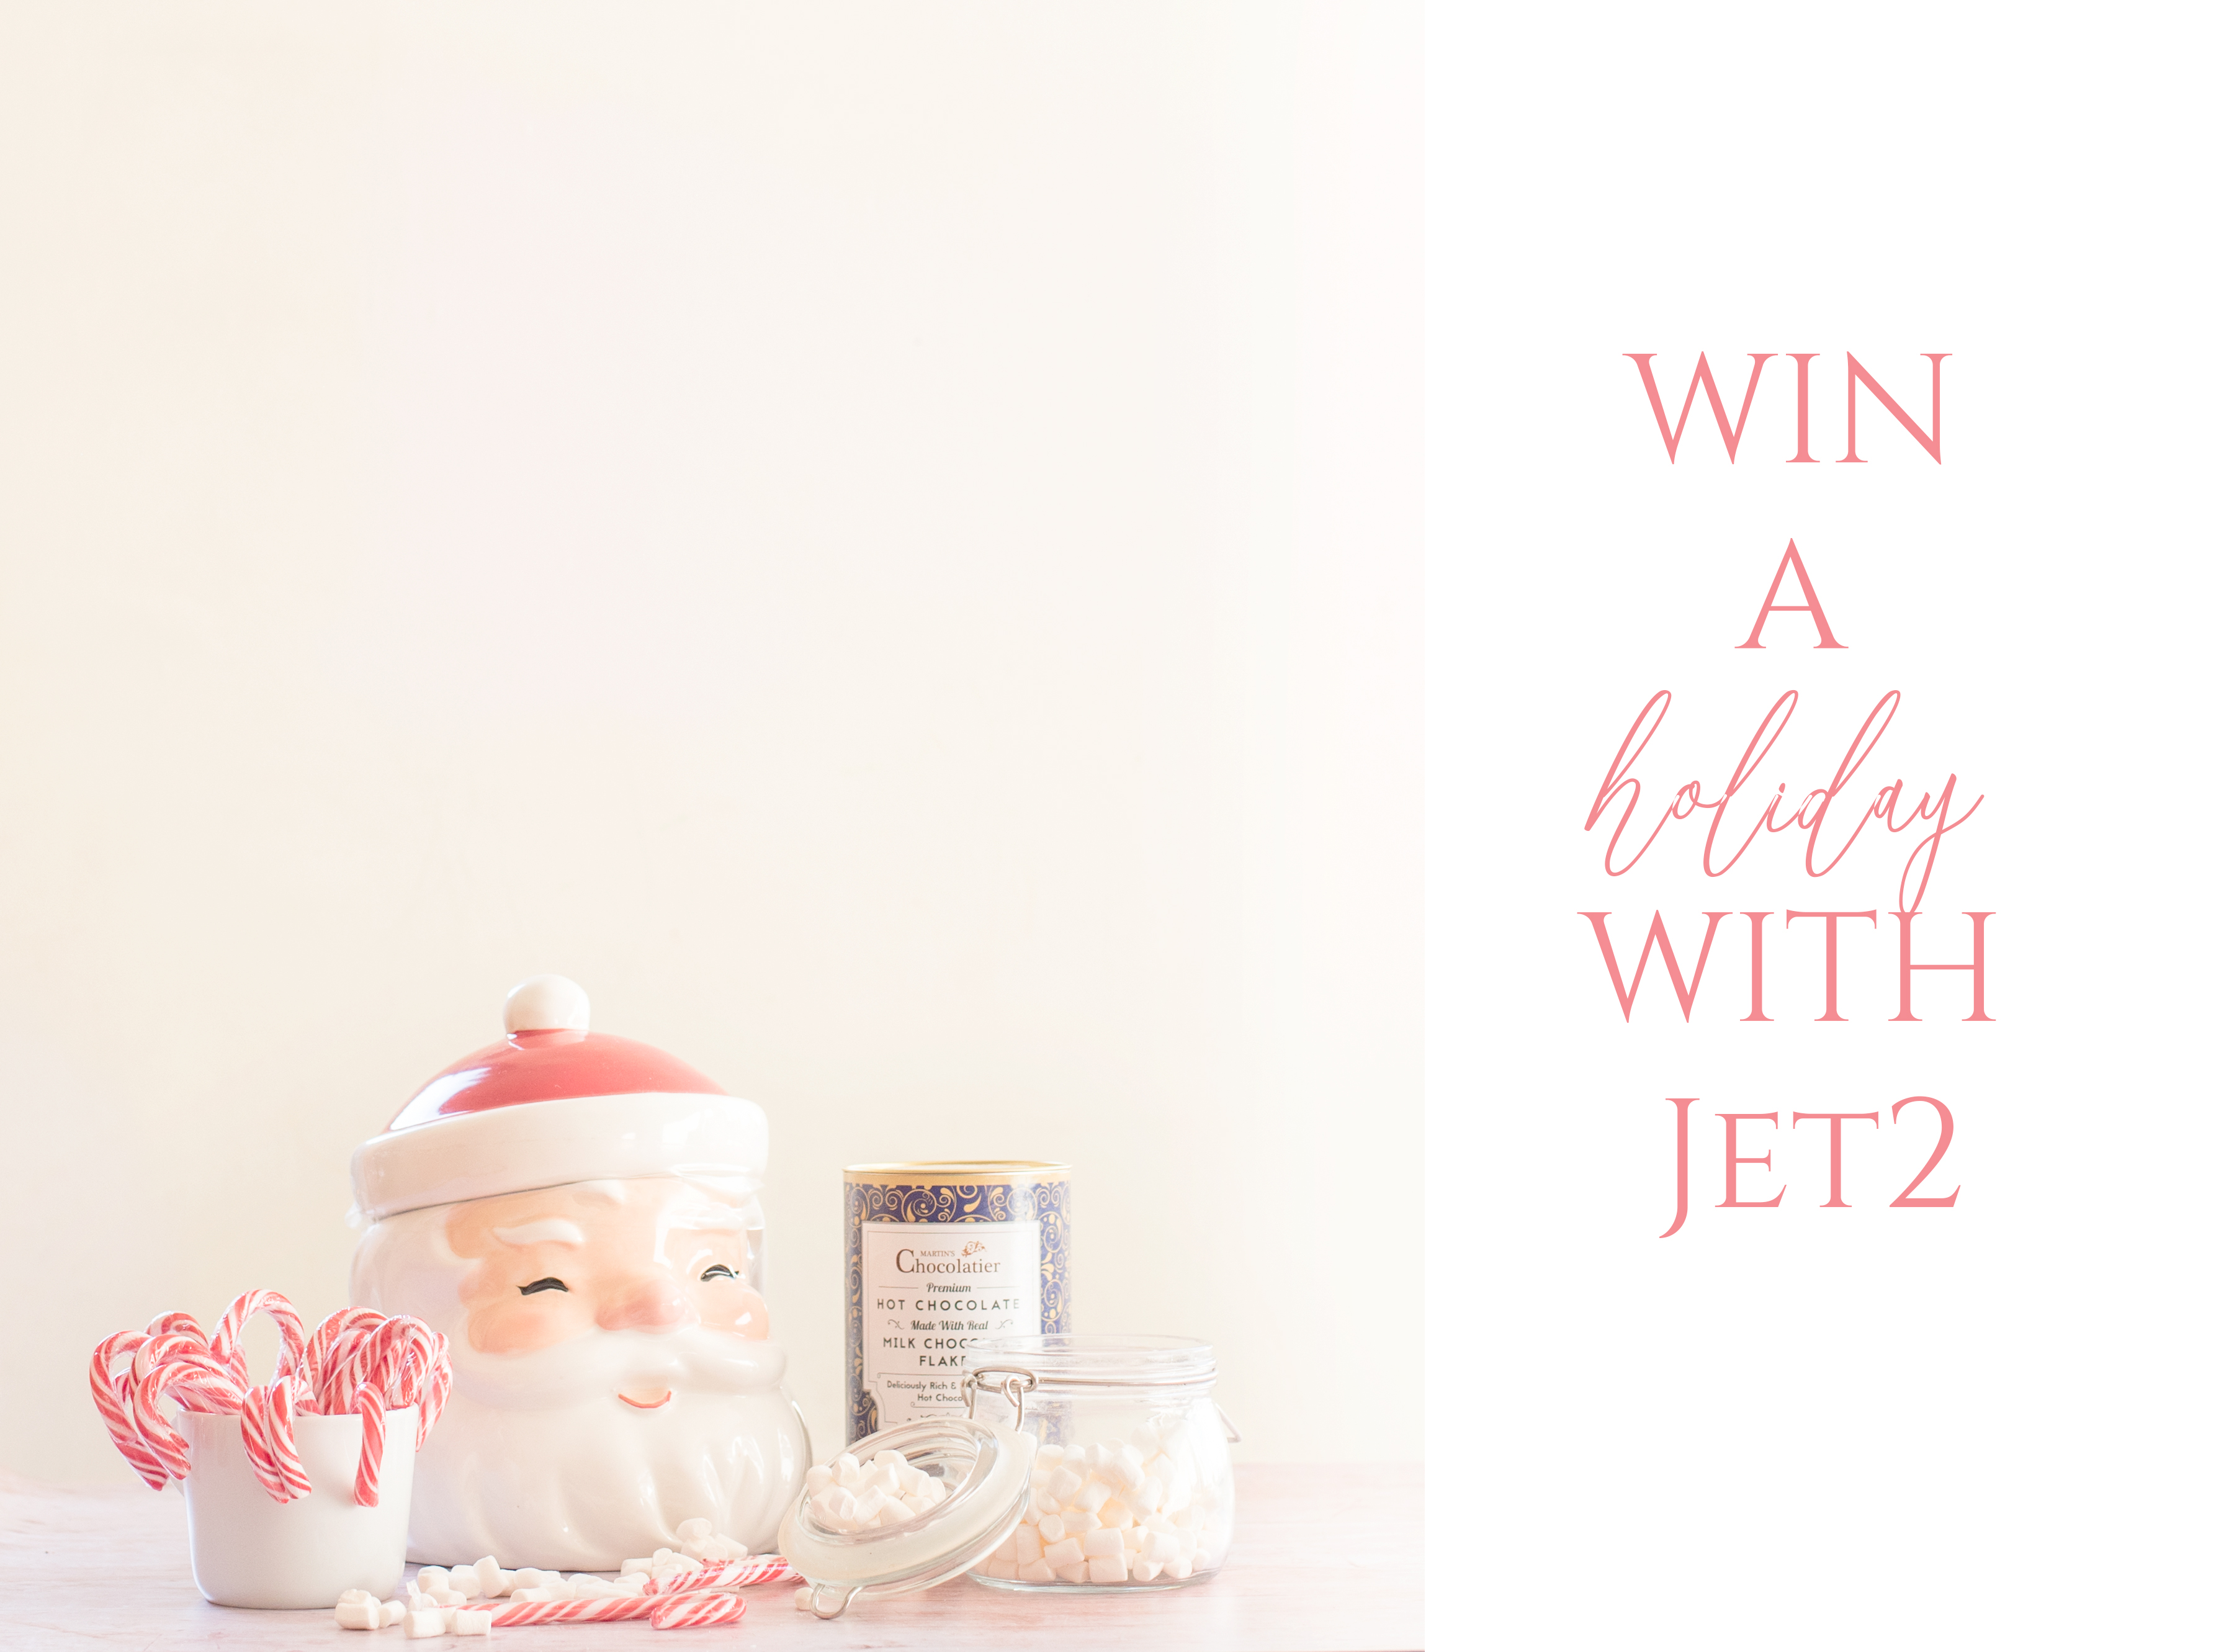 WIN A BREAK WITH JET2 HOLIDAYS [WHILST WE DRINK HOT CHOCOLATE]